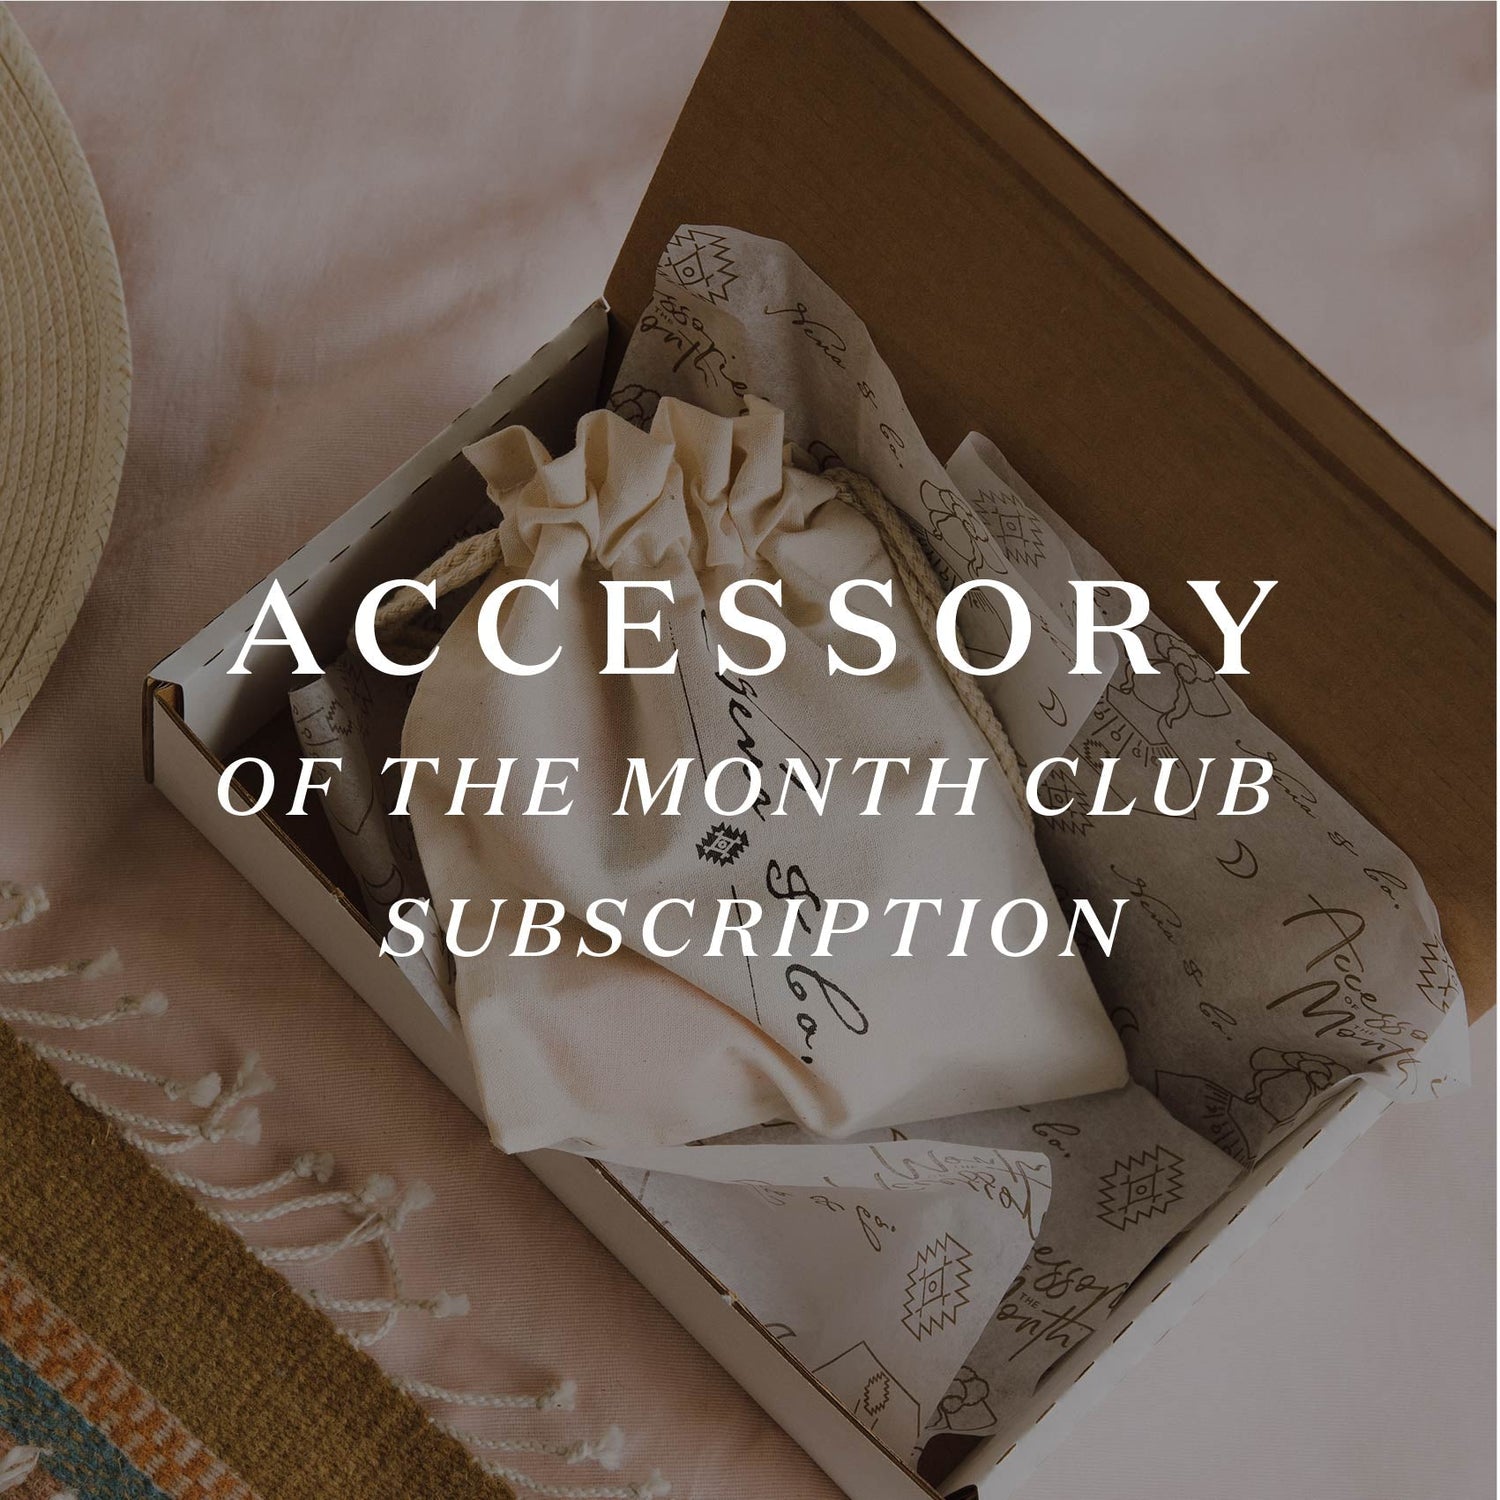 ACCESSORY OF THE MONTH CLUB SUBSCRIPTION